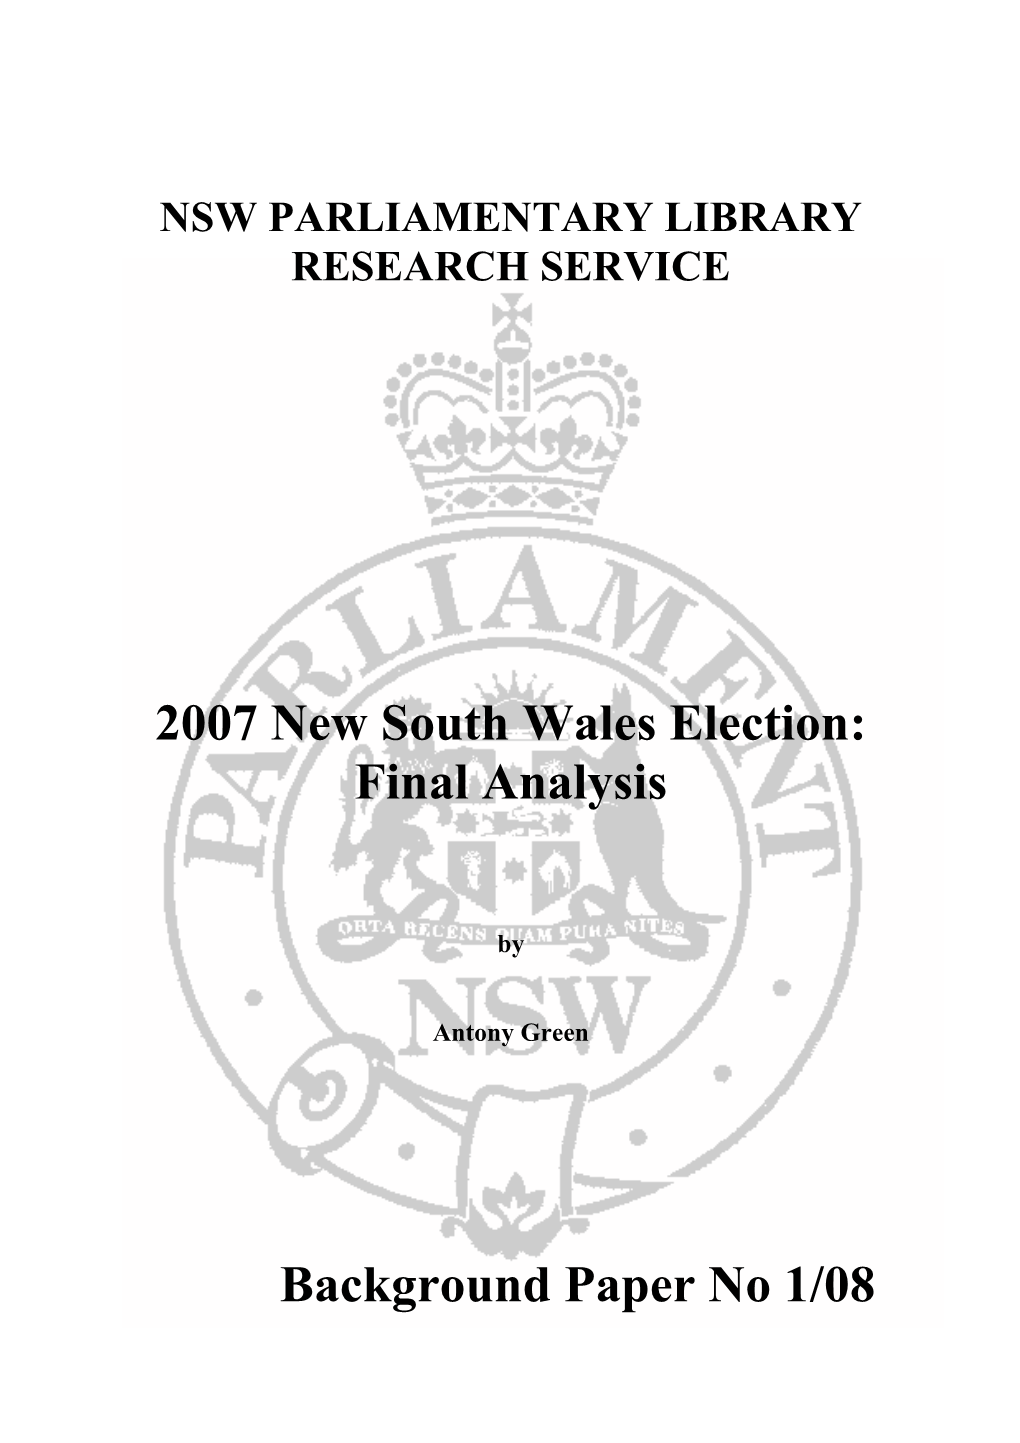 2007 New South Wales Election: Final Analysis by Antony Green 1/08